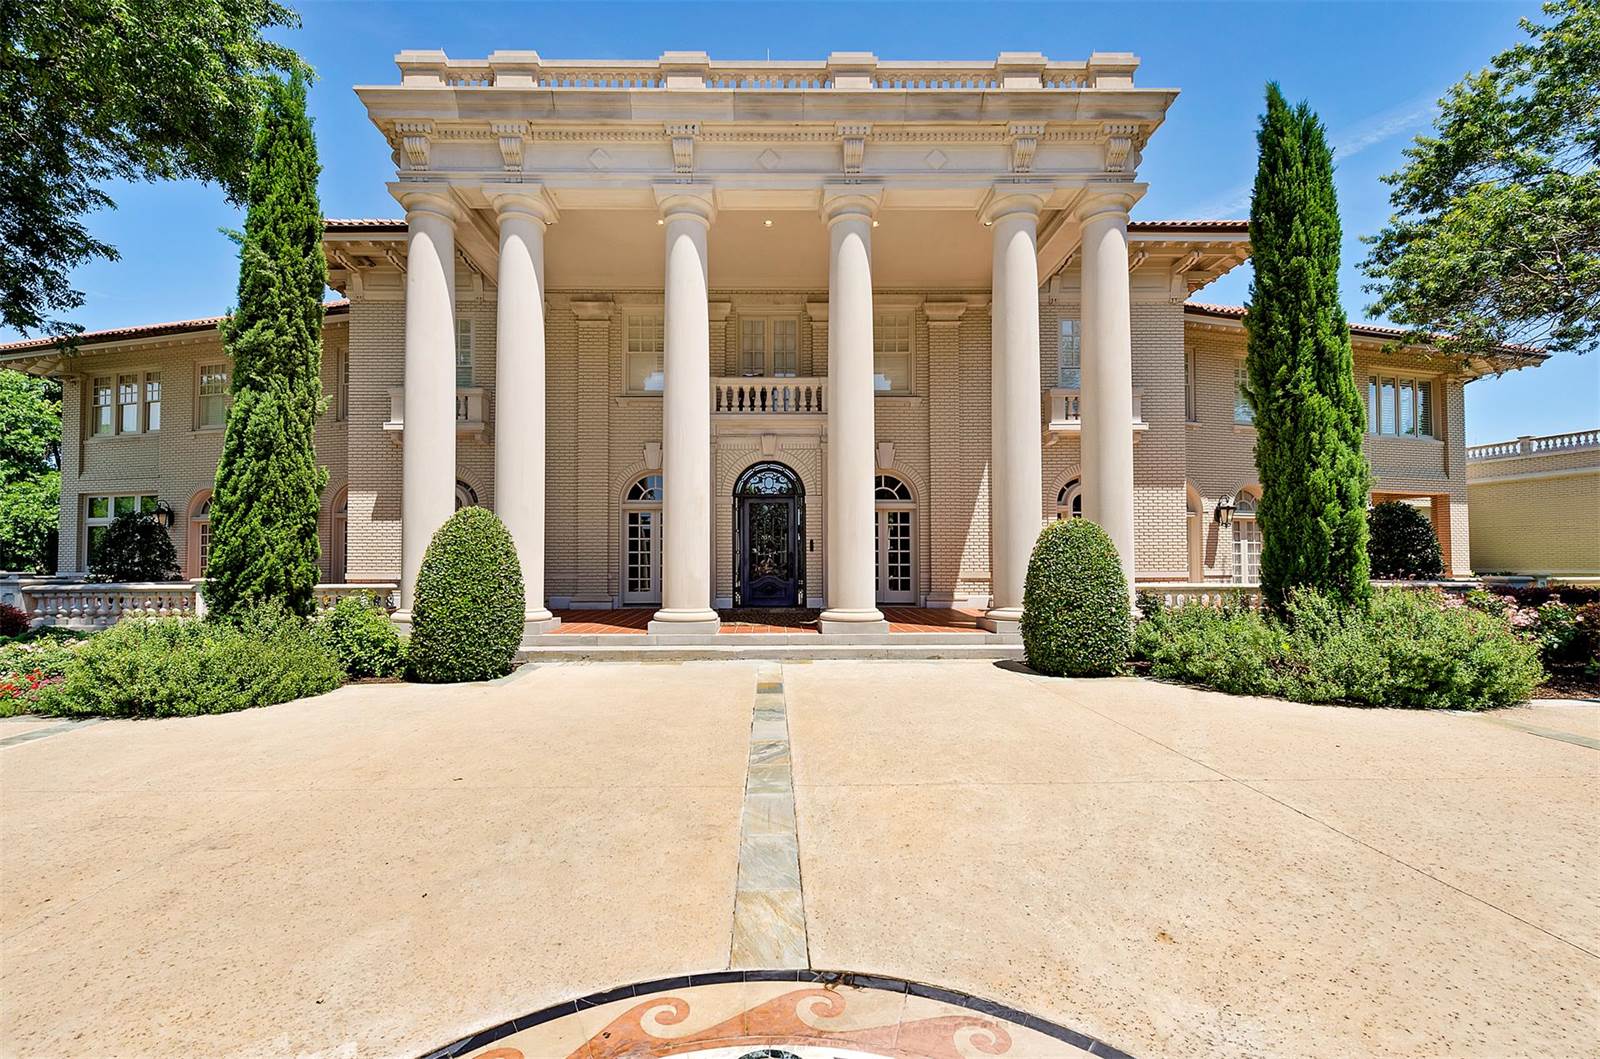 Fort Worth #39 s $8 million Baldridge House comes with its own bank vault